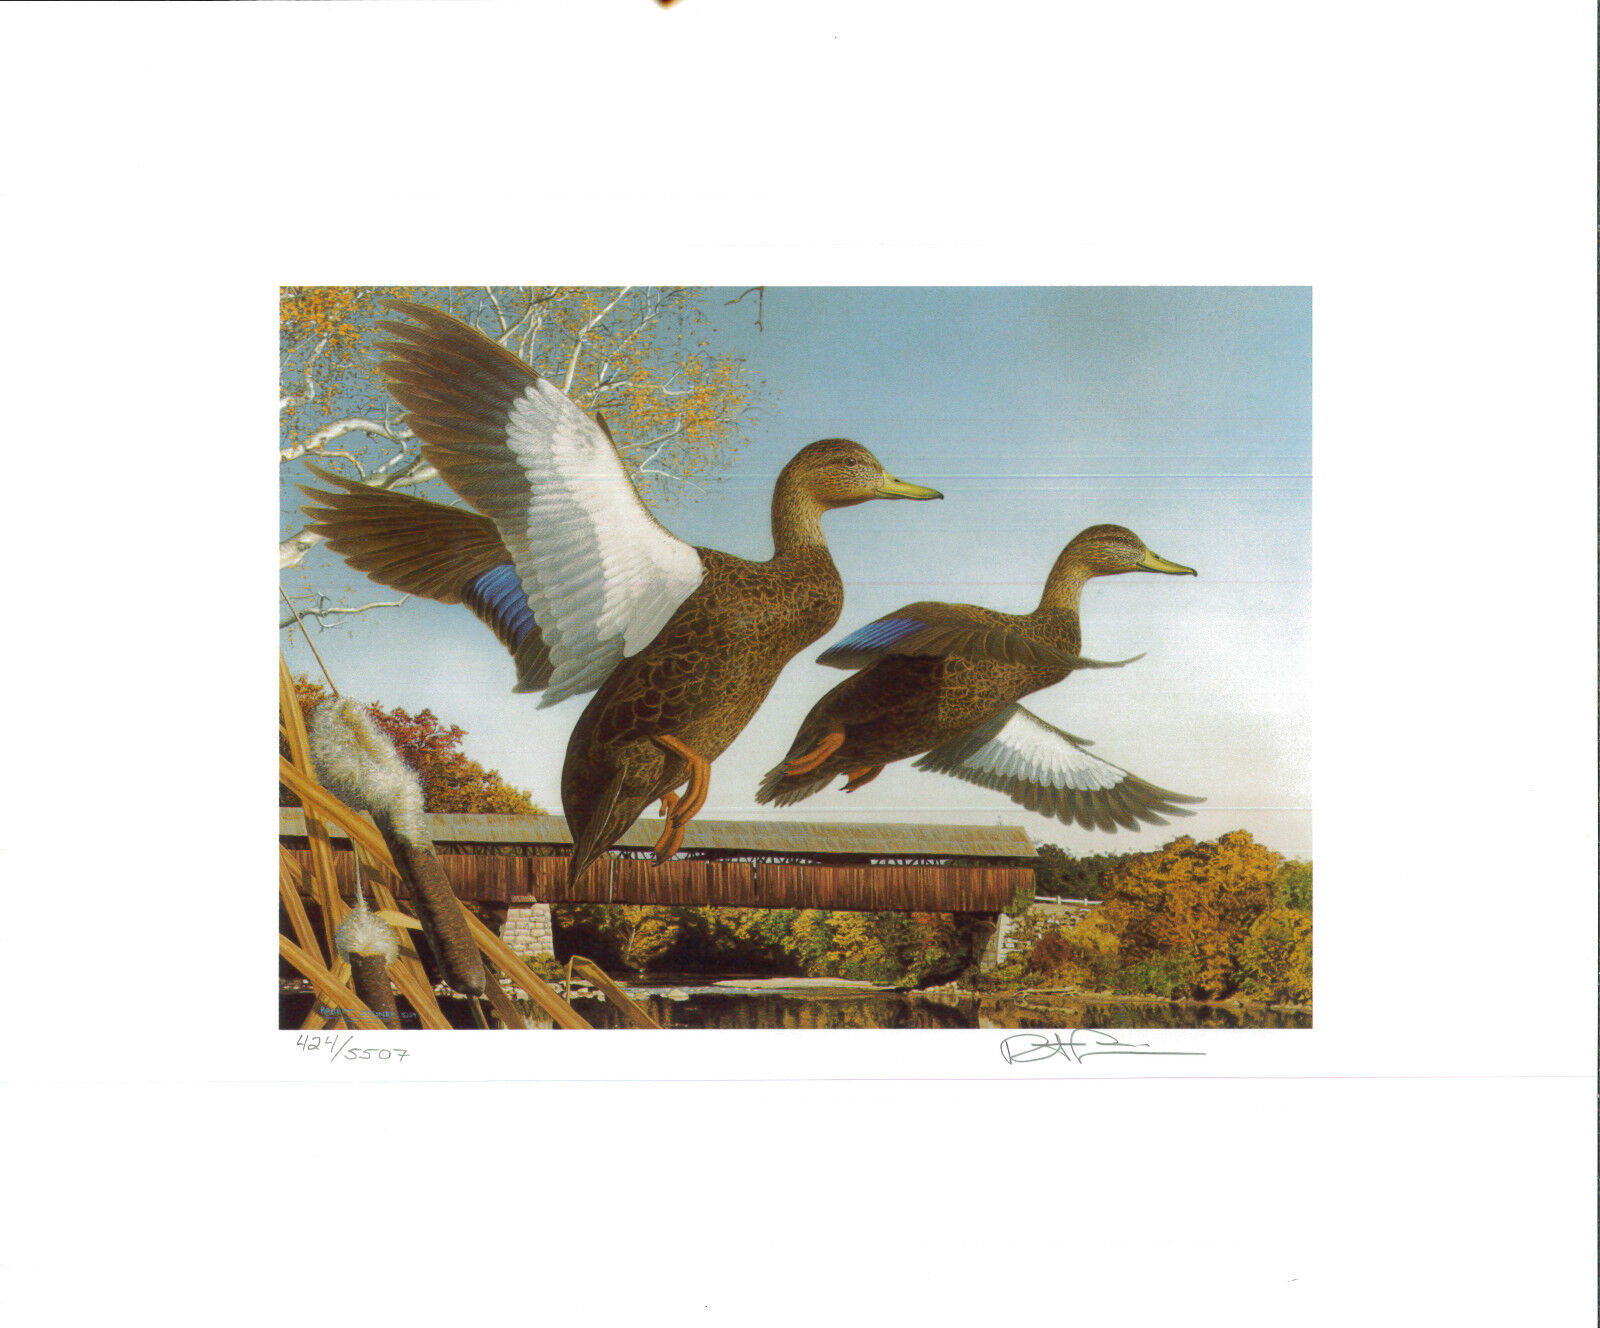 NEW HAMPSHIRE  #7 1989 STATE  DUCK  STAMP PRINT  BLACK DUCKS  GOVERNORS EDITION